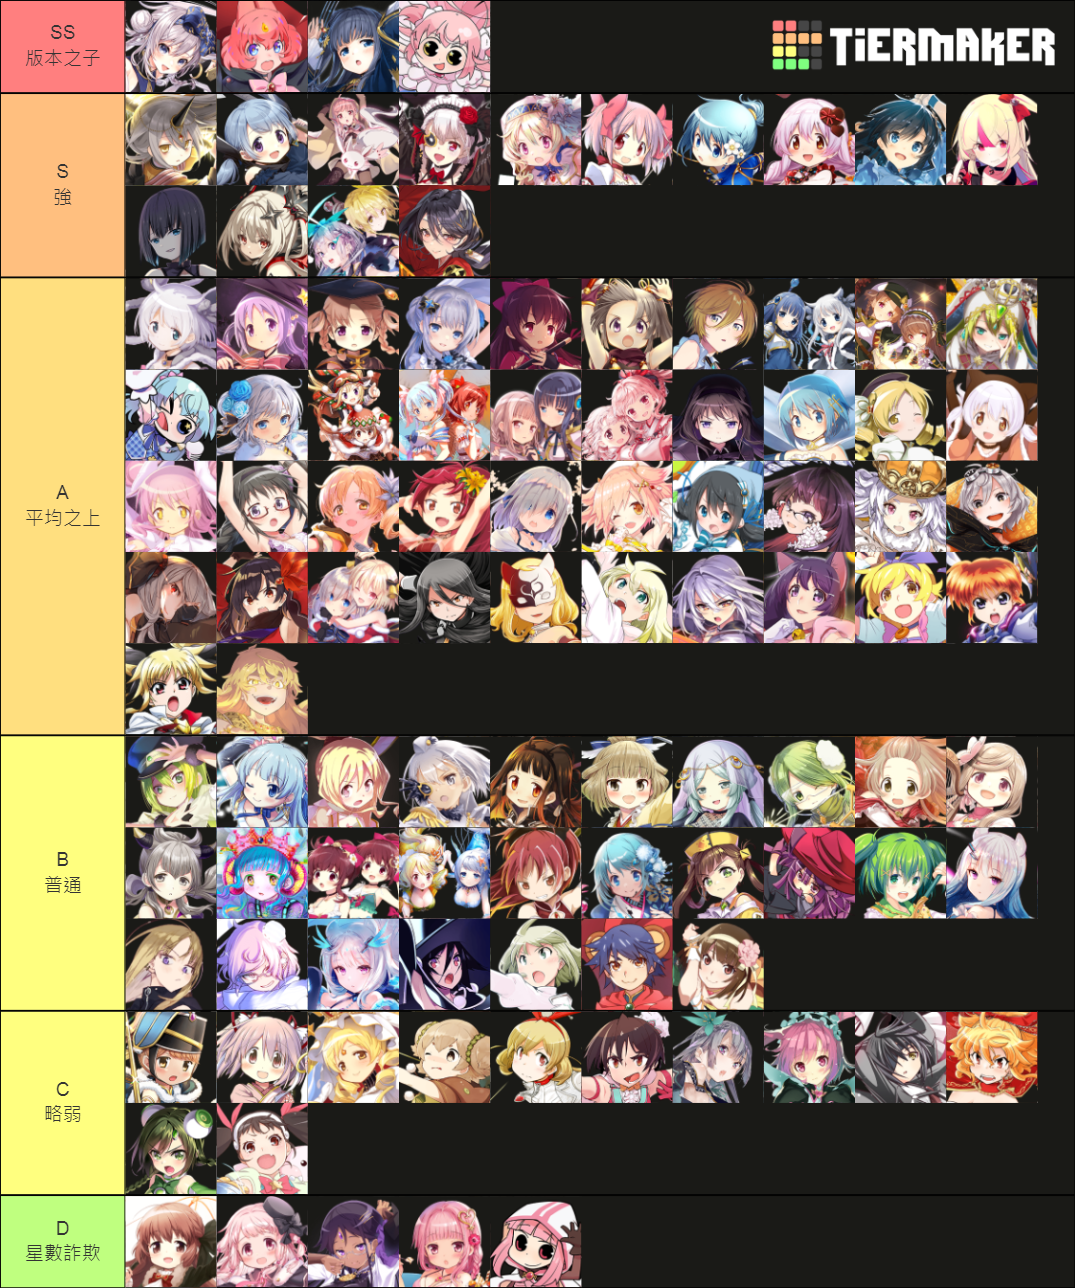 magia record ★4 Tier List Rankings) TierMaker